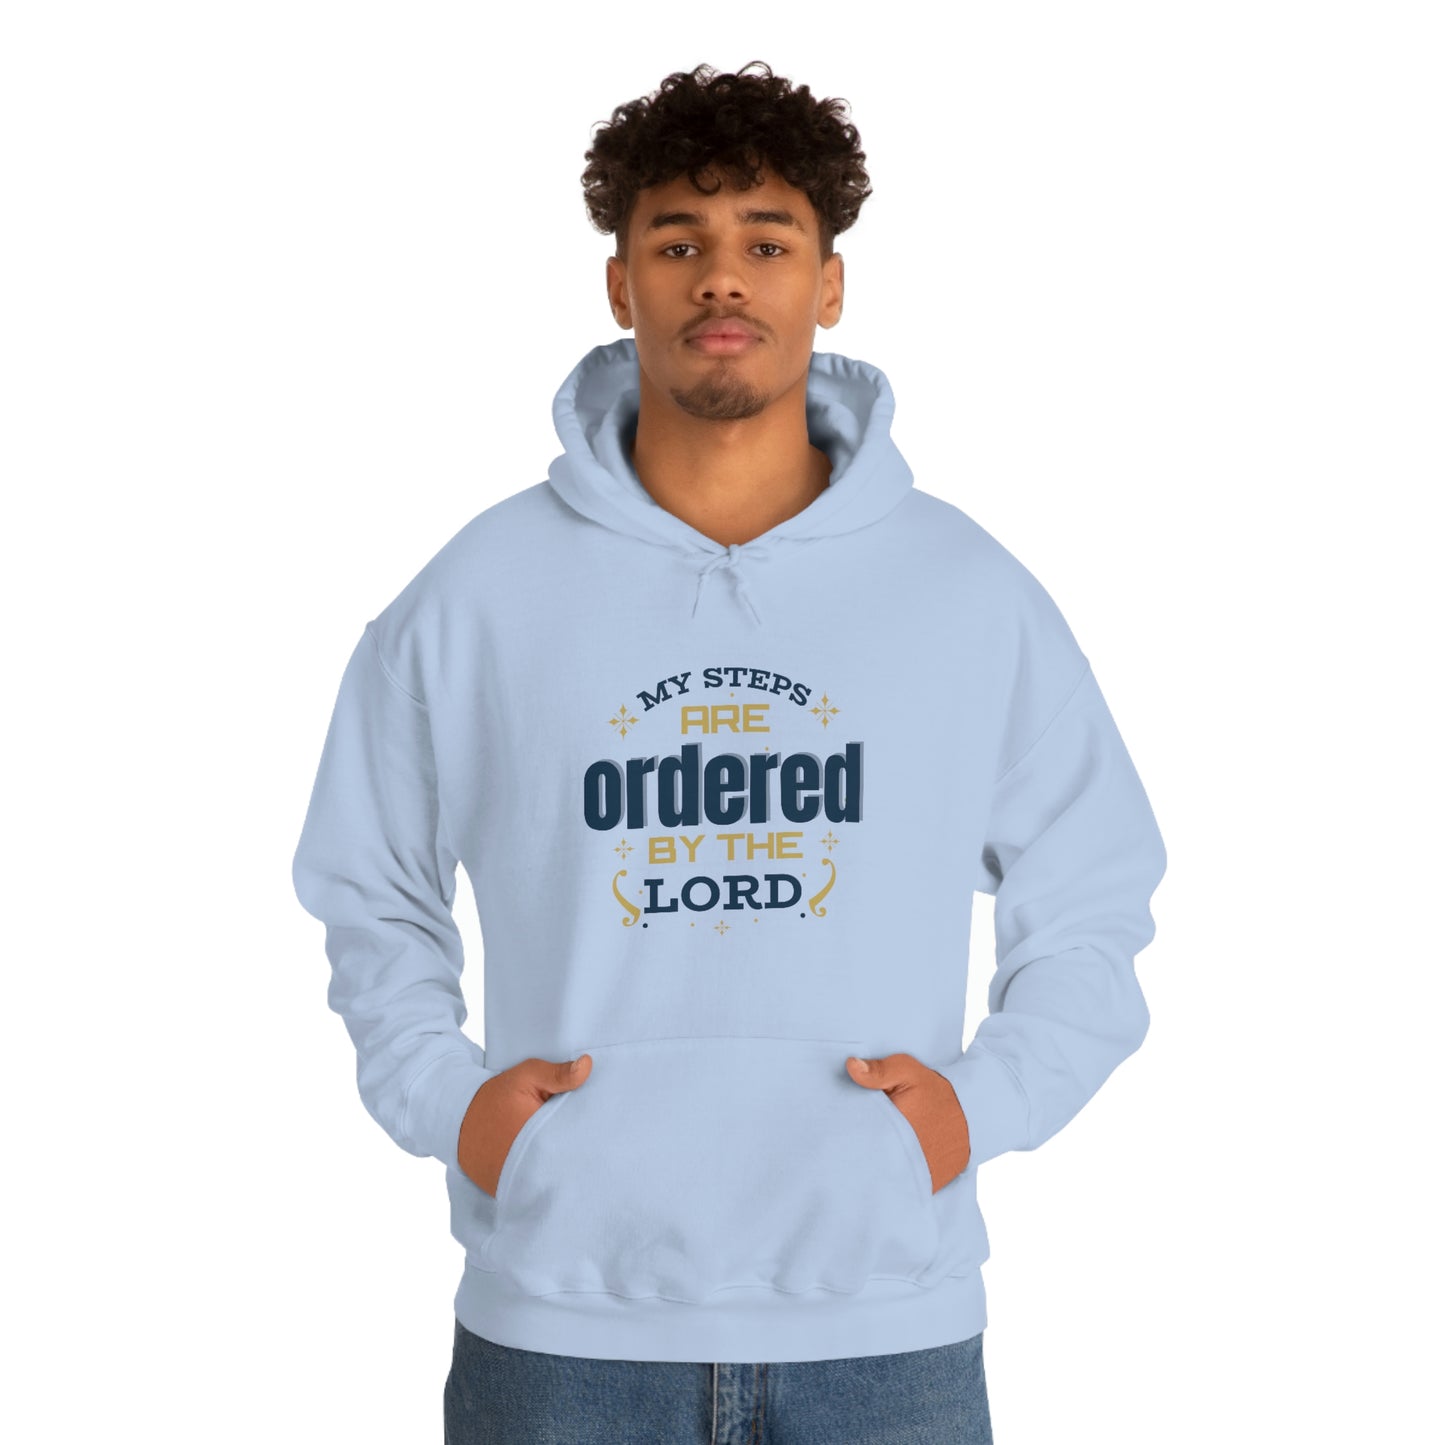 My Steps Are Ordered By The Lord Unisex Pull On Hooded sweatshirt